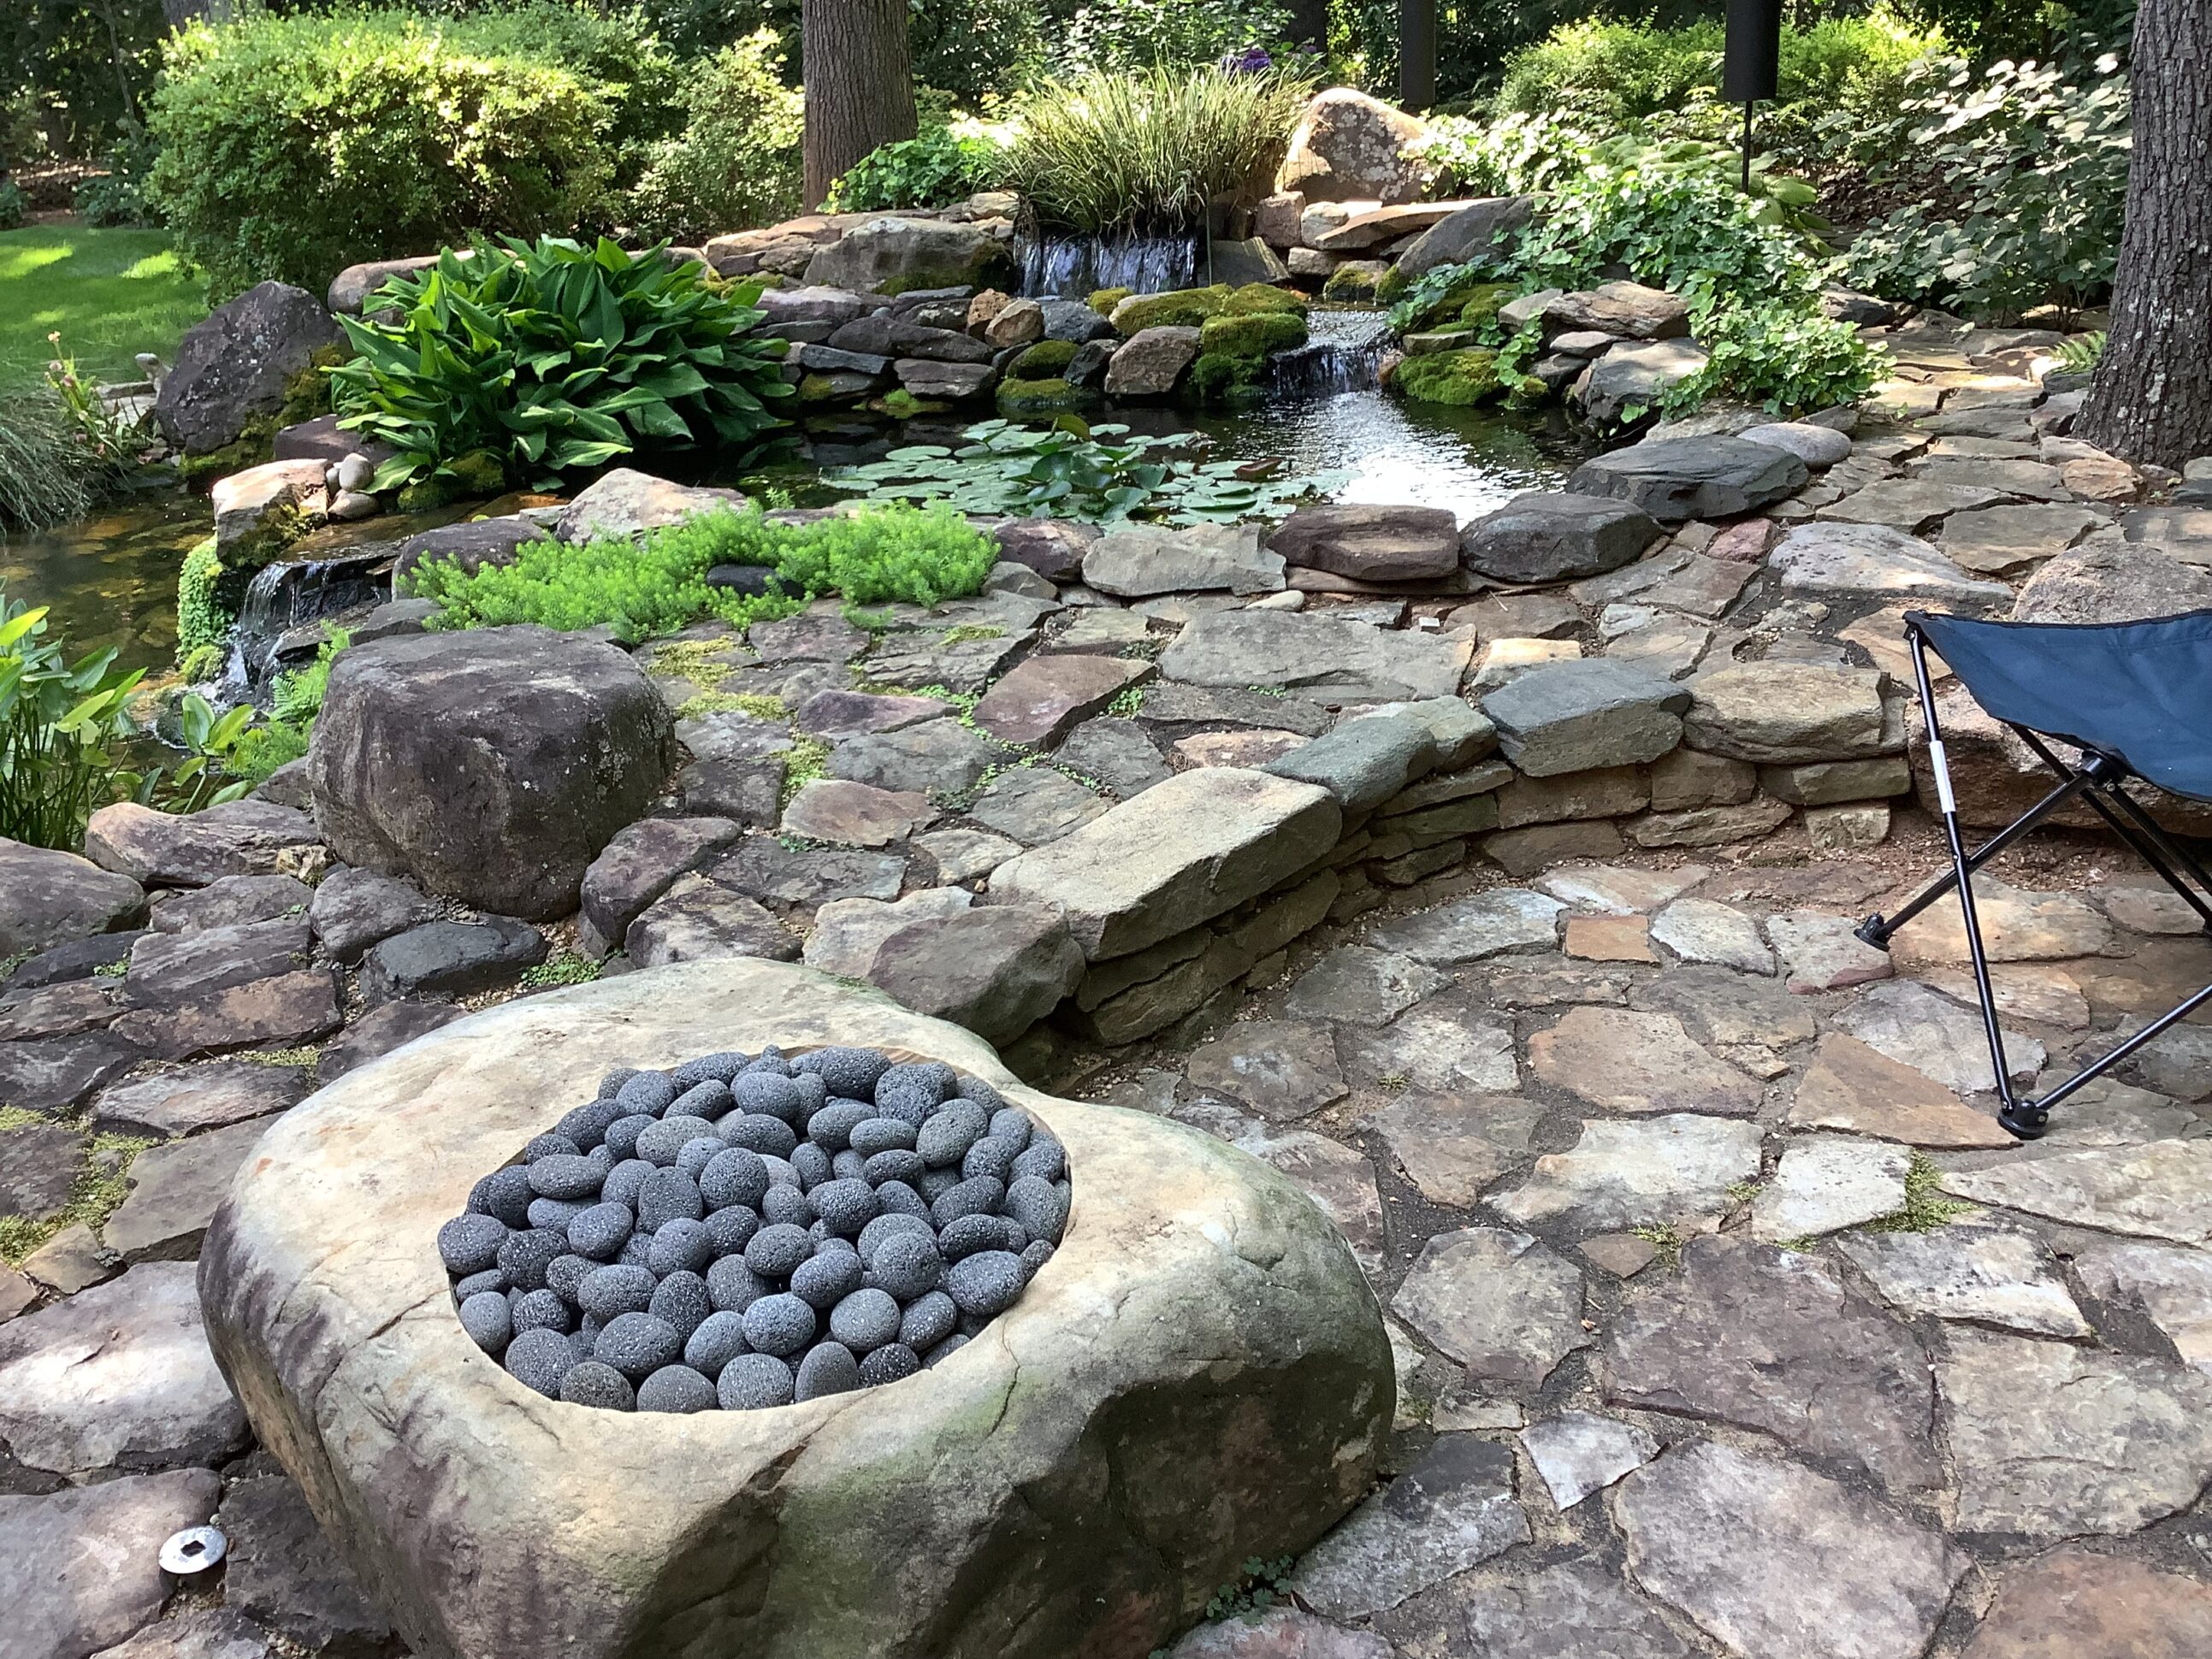 A stone garden with rocks and water features.